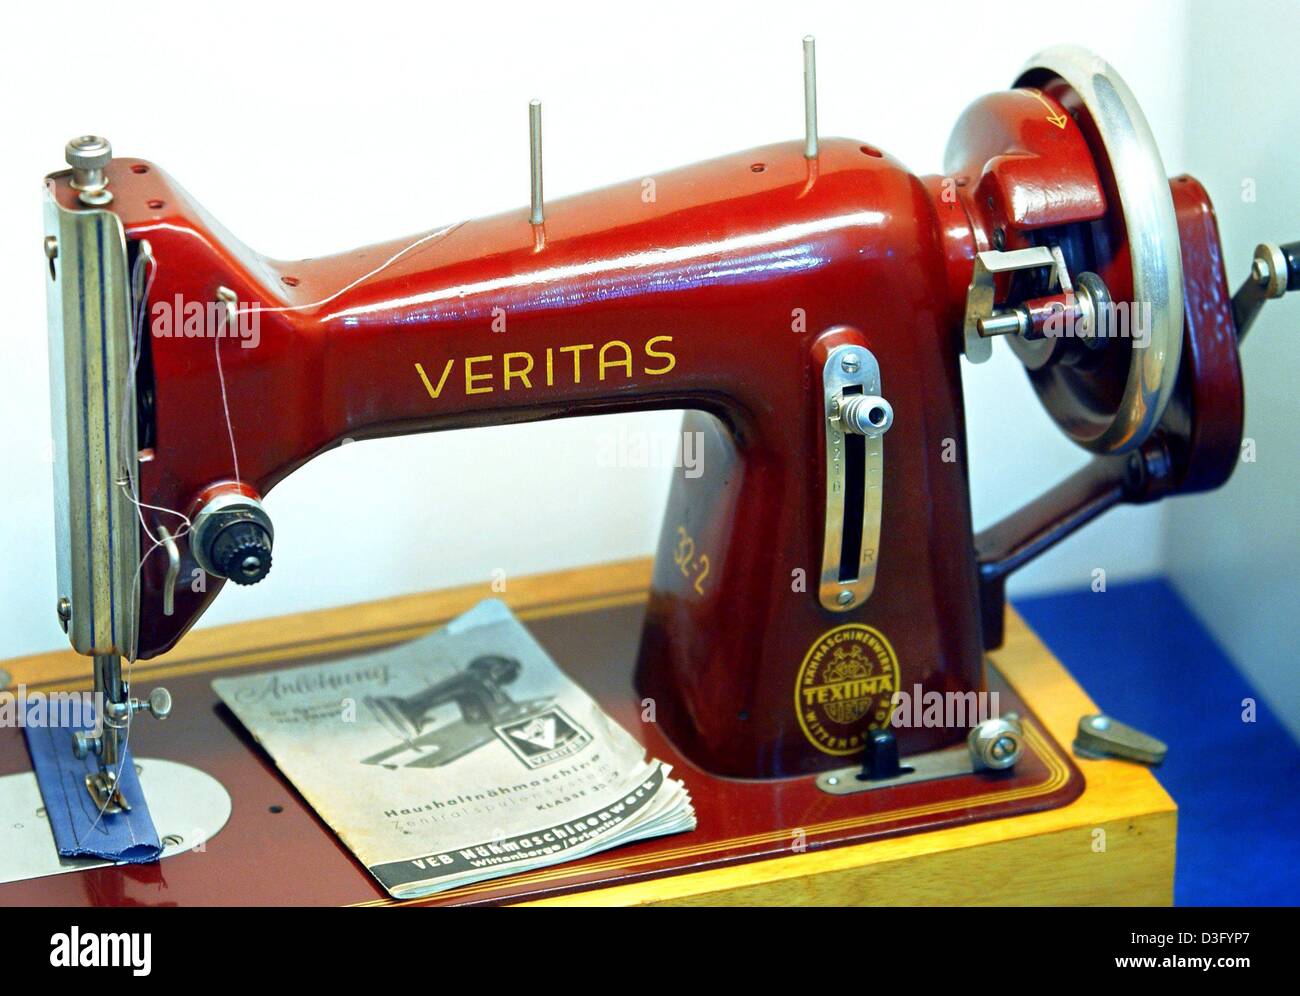 dpa) - One of the first sewing-machines of the brand Veritas which was  produced in the GDR is displayed in the sewing-machine museum in  Wittenberge, Germany, 27 February 2003. 200 sewing-machines made